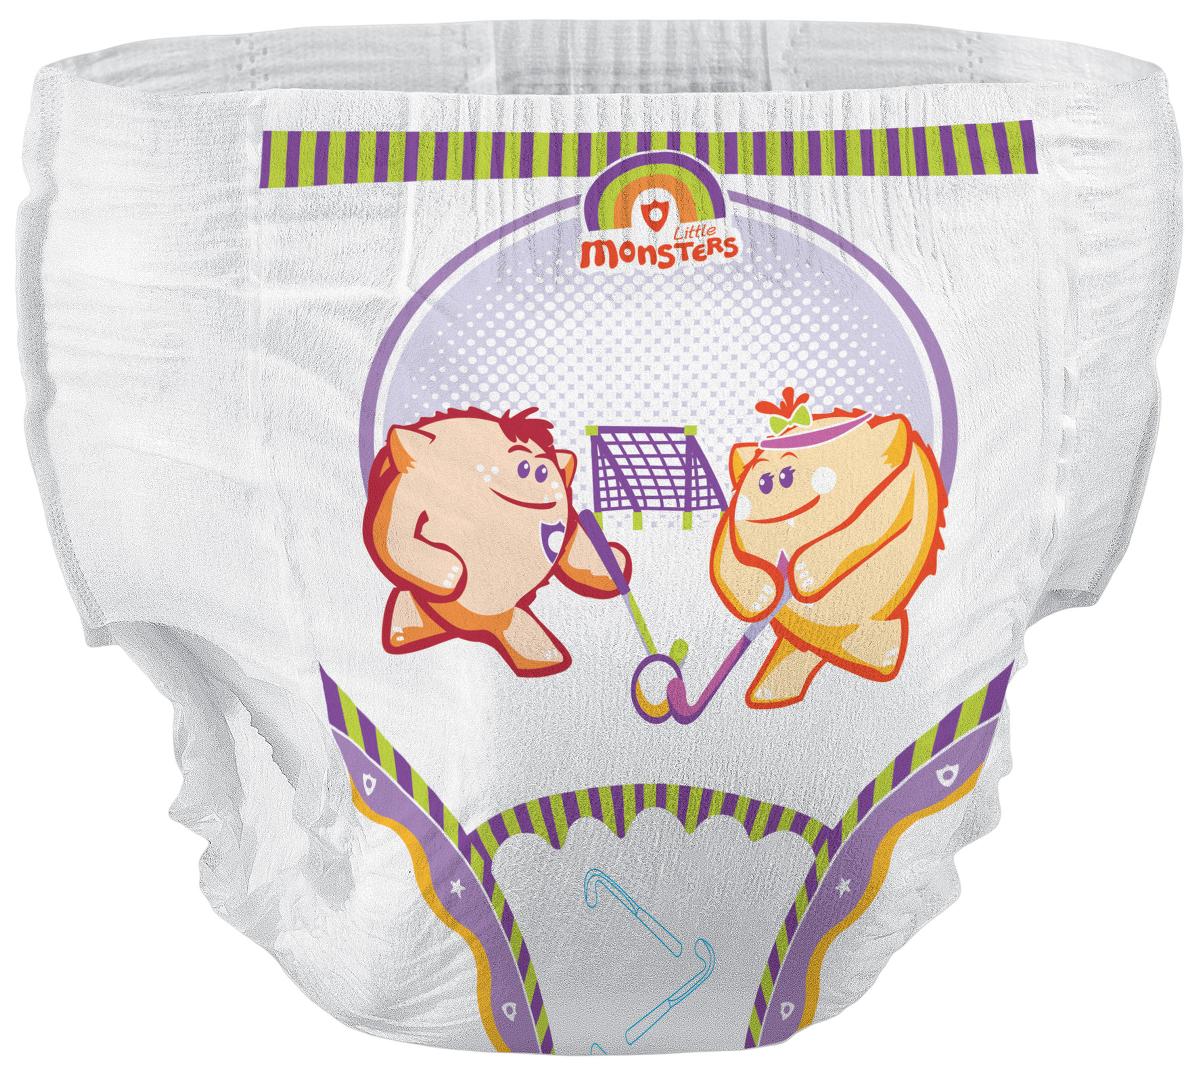 Potty Training Time, Disposable Fit Like Underwear Training Pants